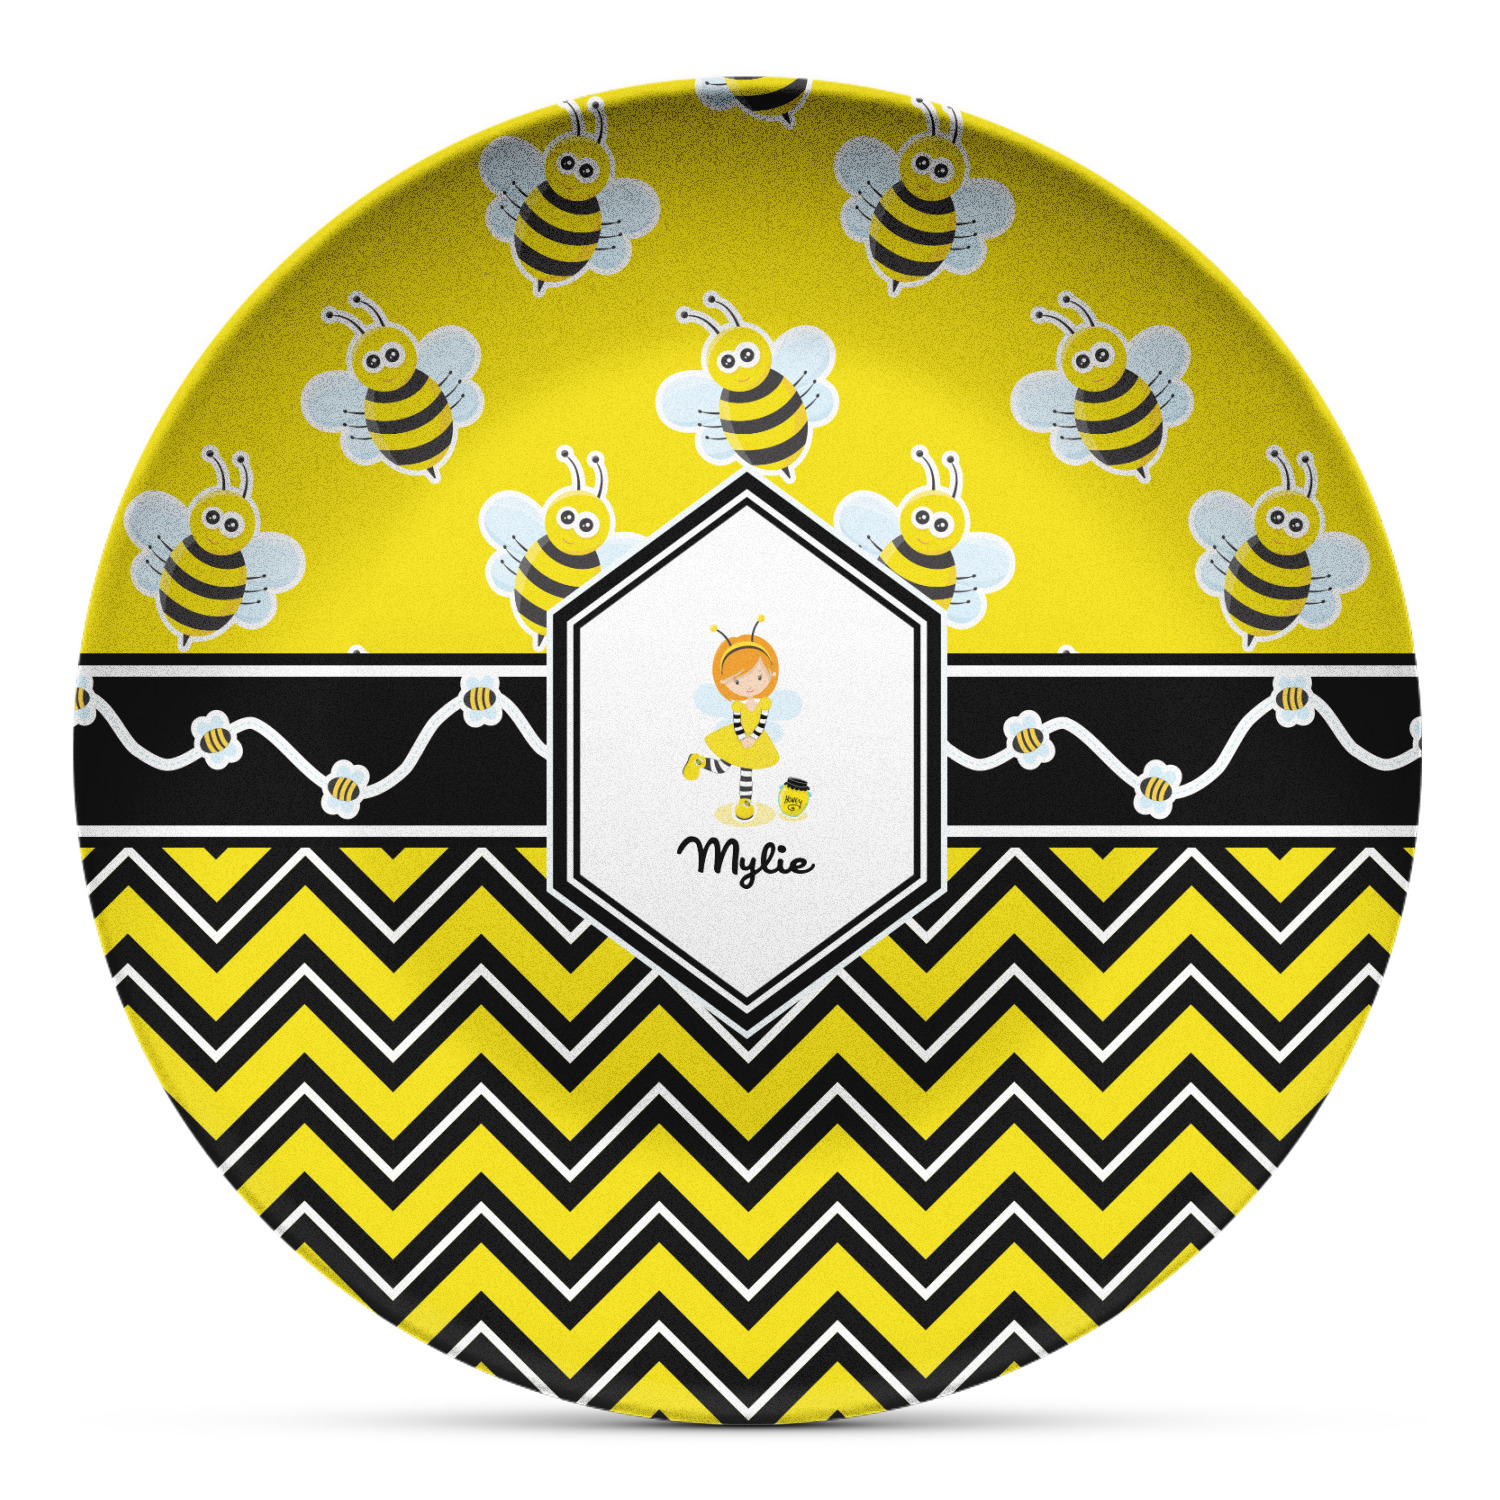 Buzzing Bee Microwave Safe Plastic Plate - Composite Polymer